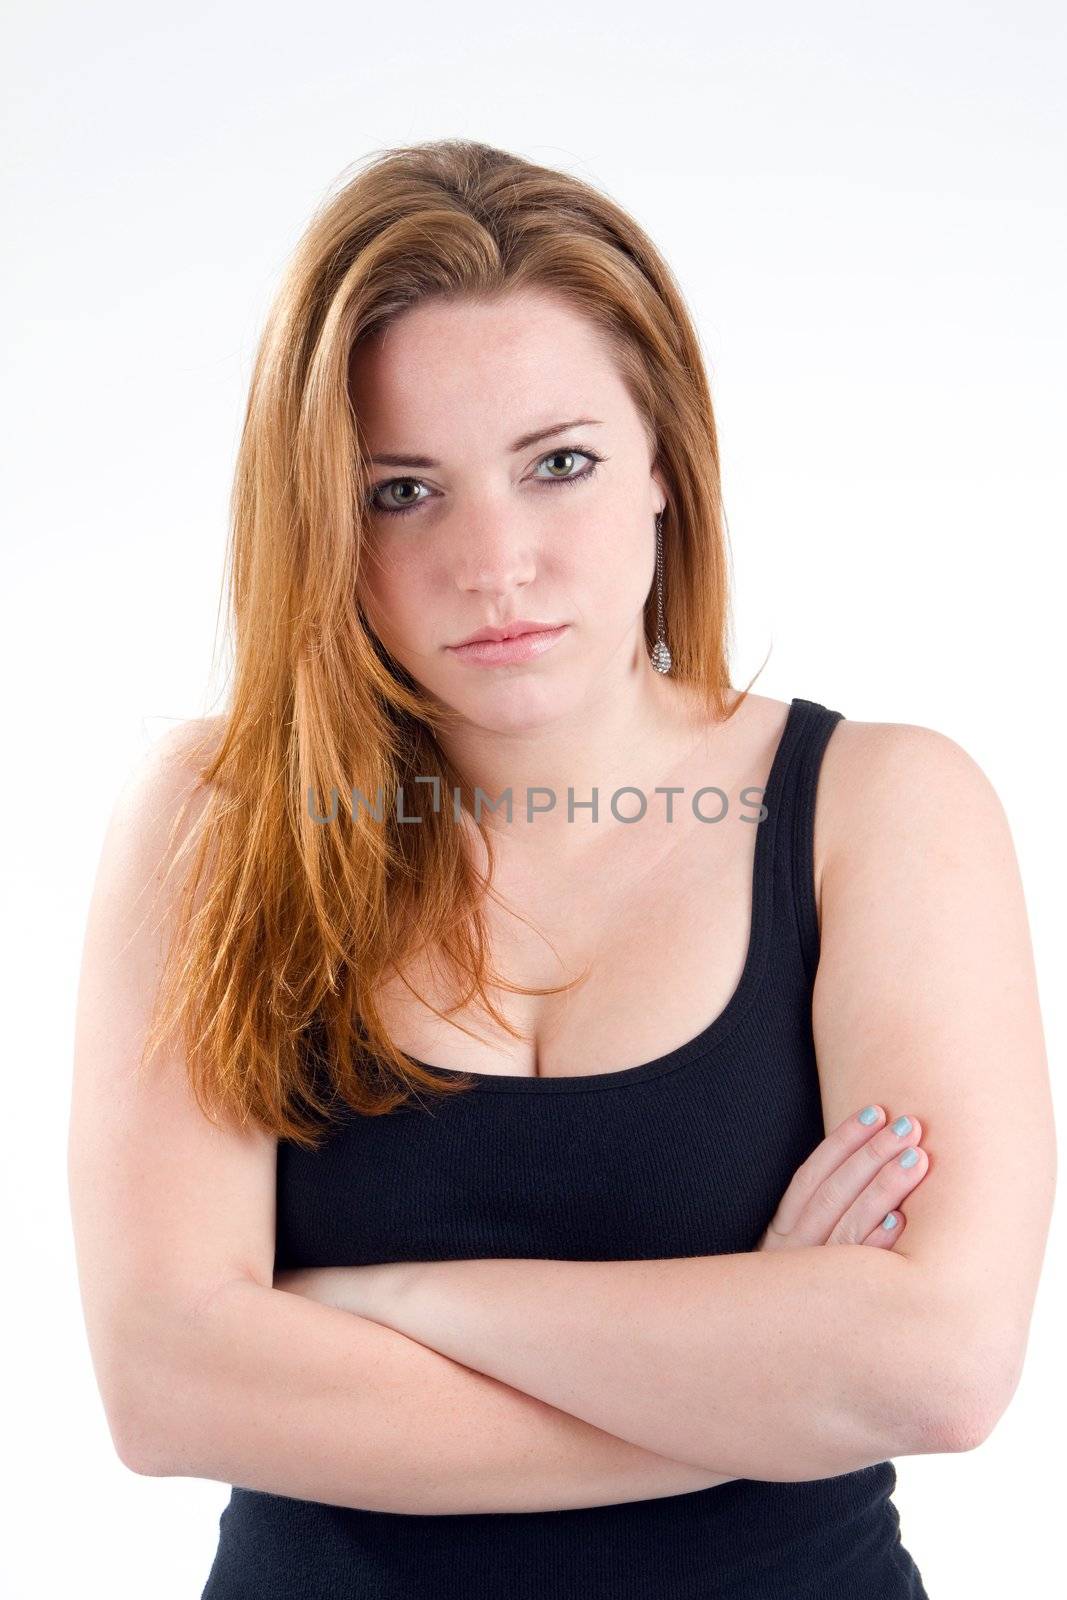 Woman with her arms crossed and a stern unpleasant serious attitude look on her face.